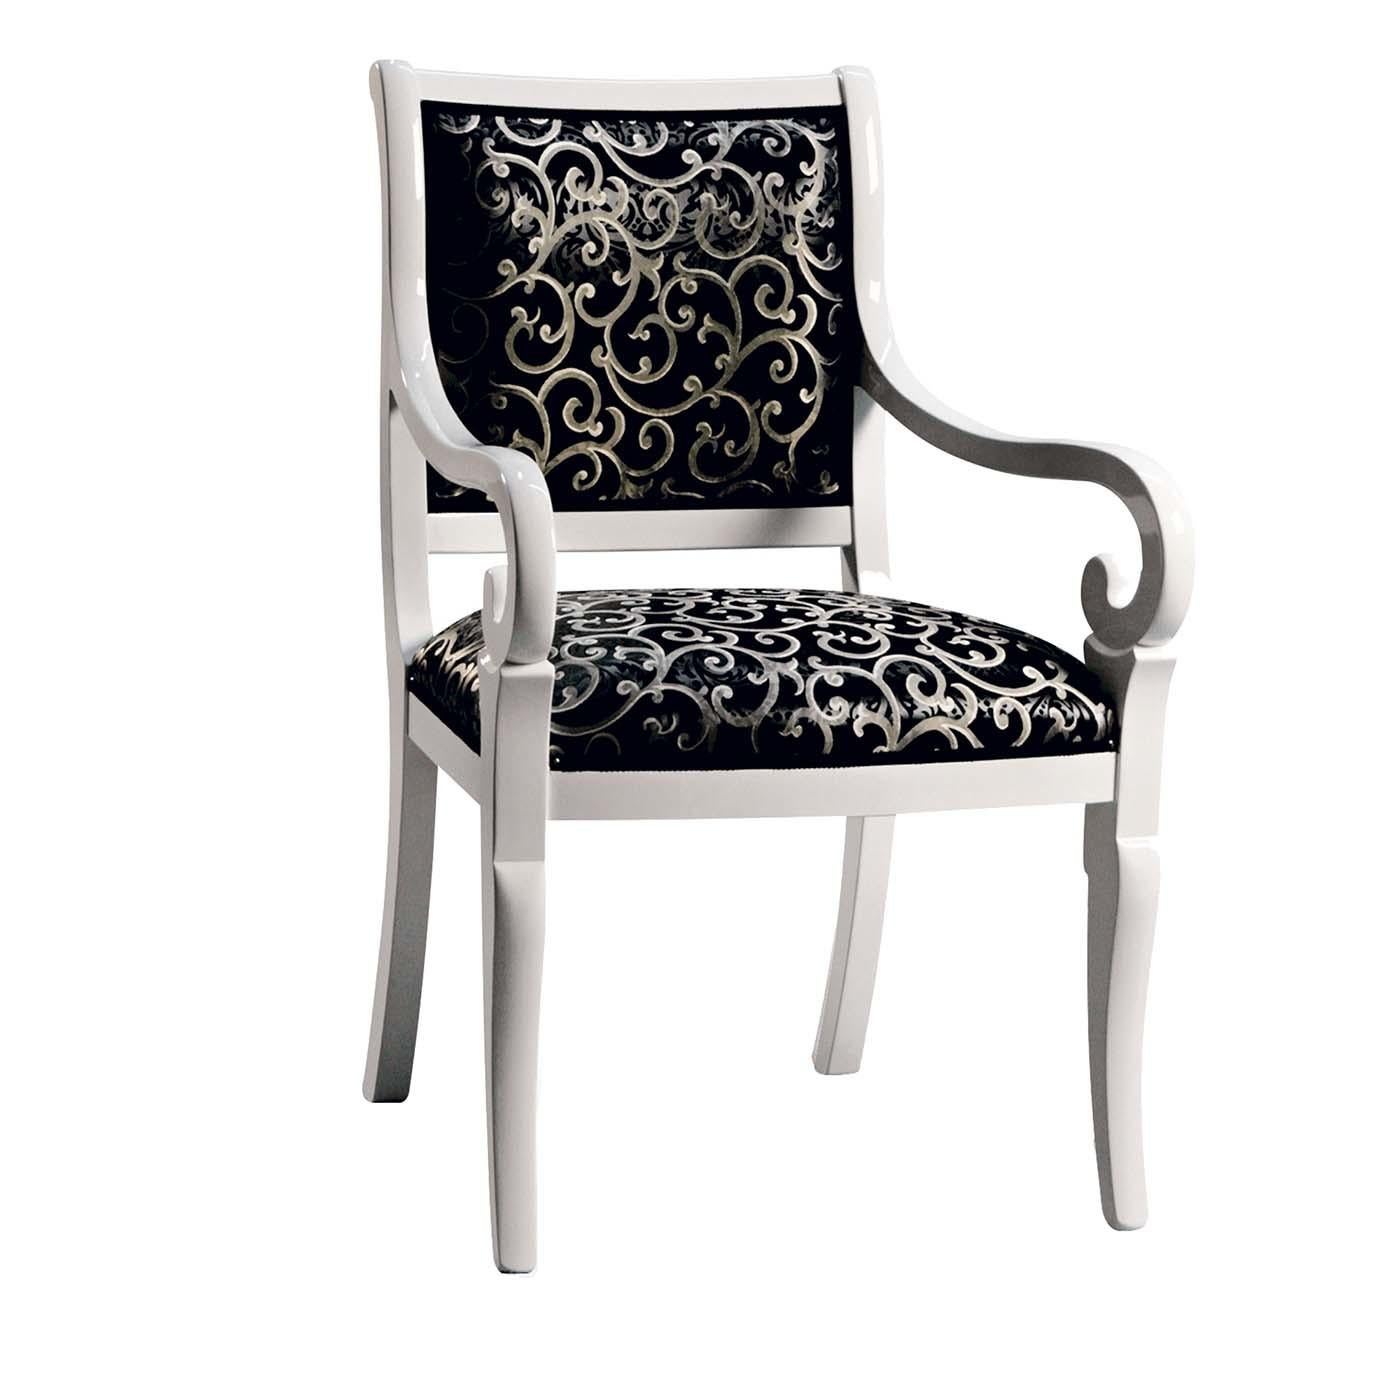 Showcasing the expertise of its craftsmen, Modenese Gastone created a superb chair with armrests of regal and delicate visual harmony. The solid wood frame bends in delicate saber legs and curved armrests, enclosing the padded seat and backrest. The